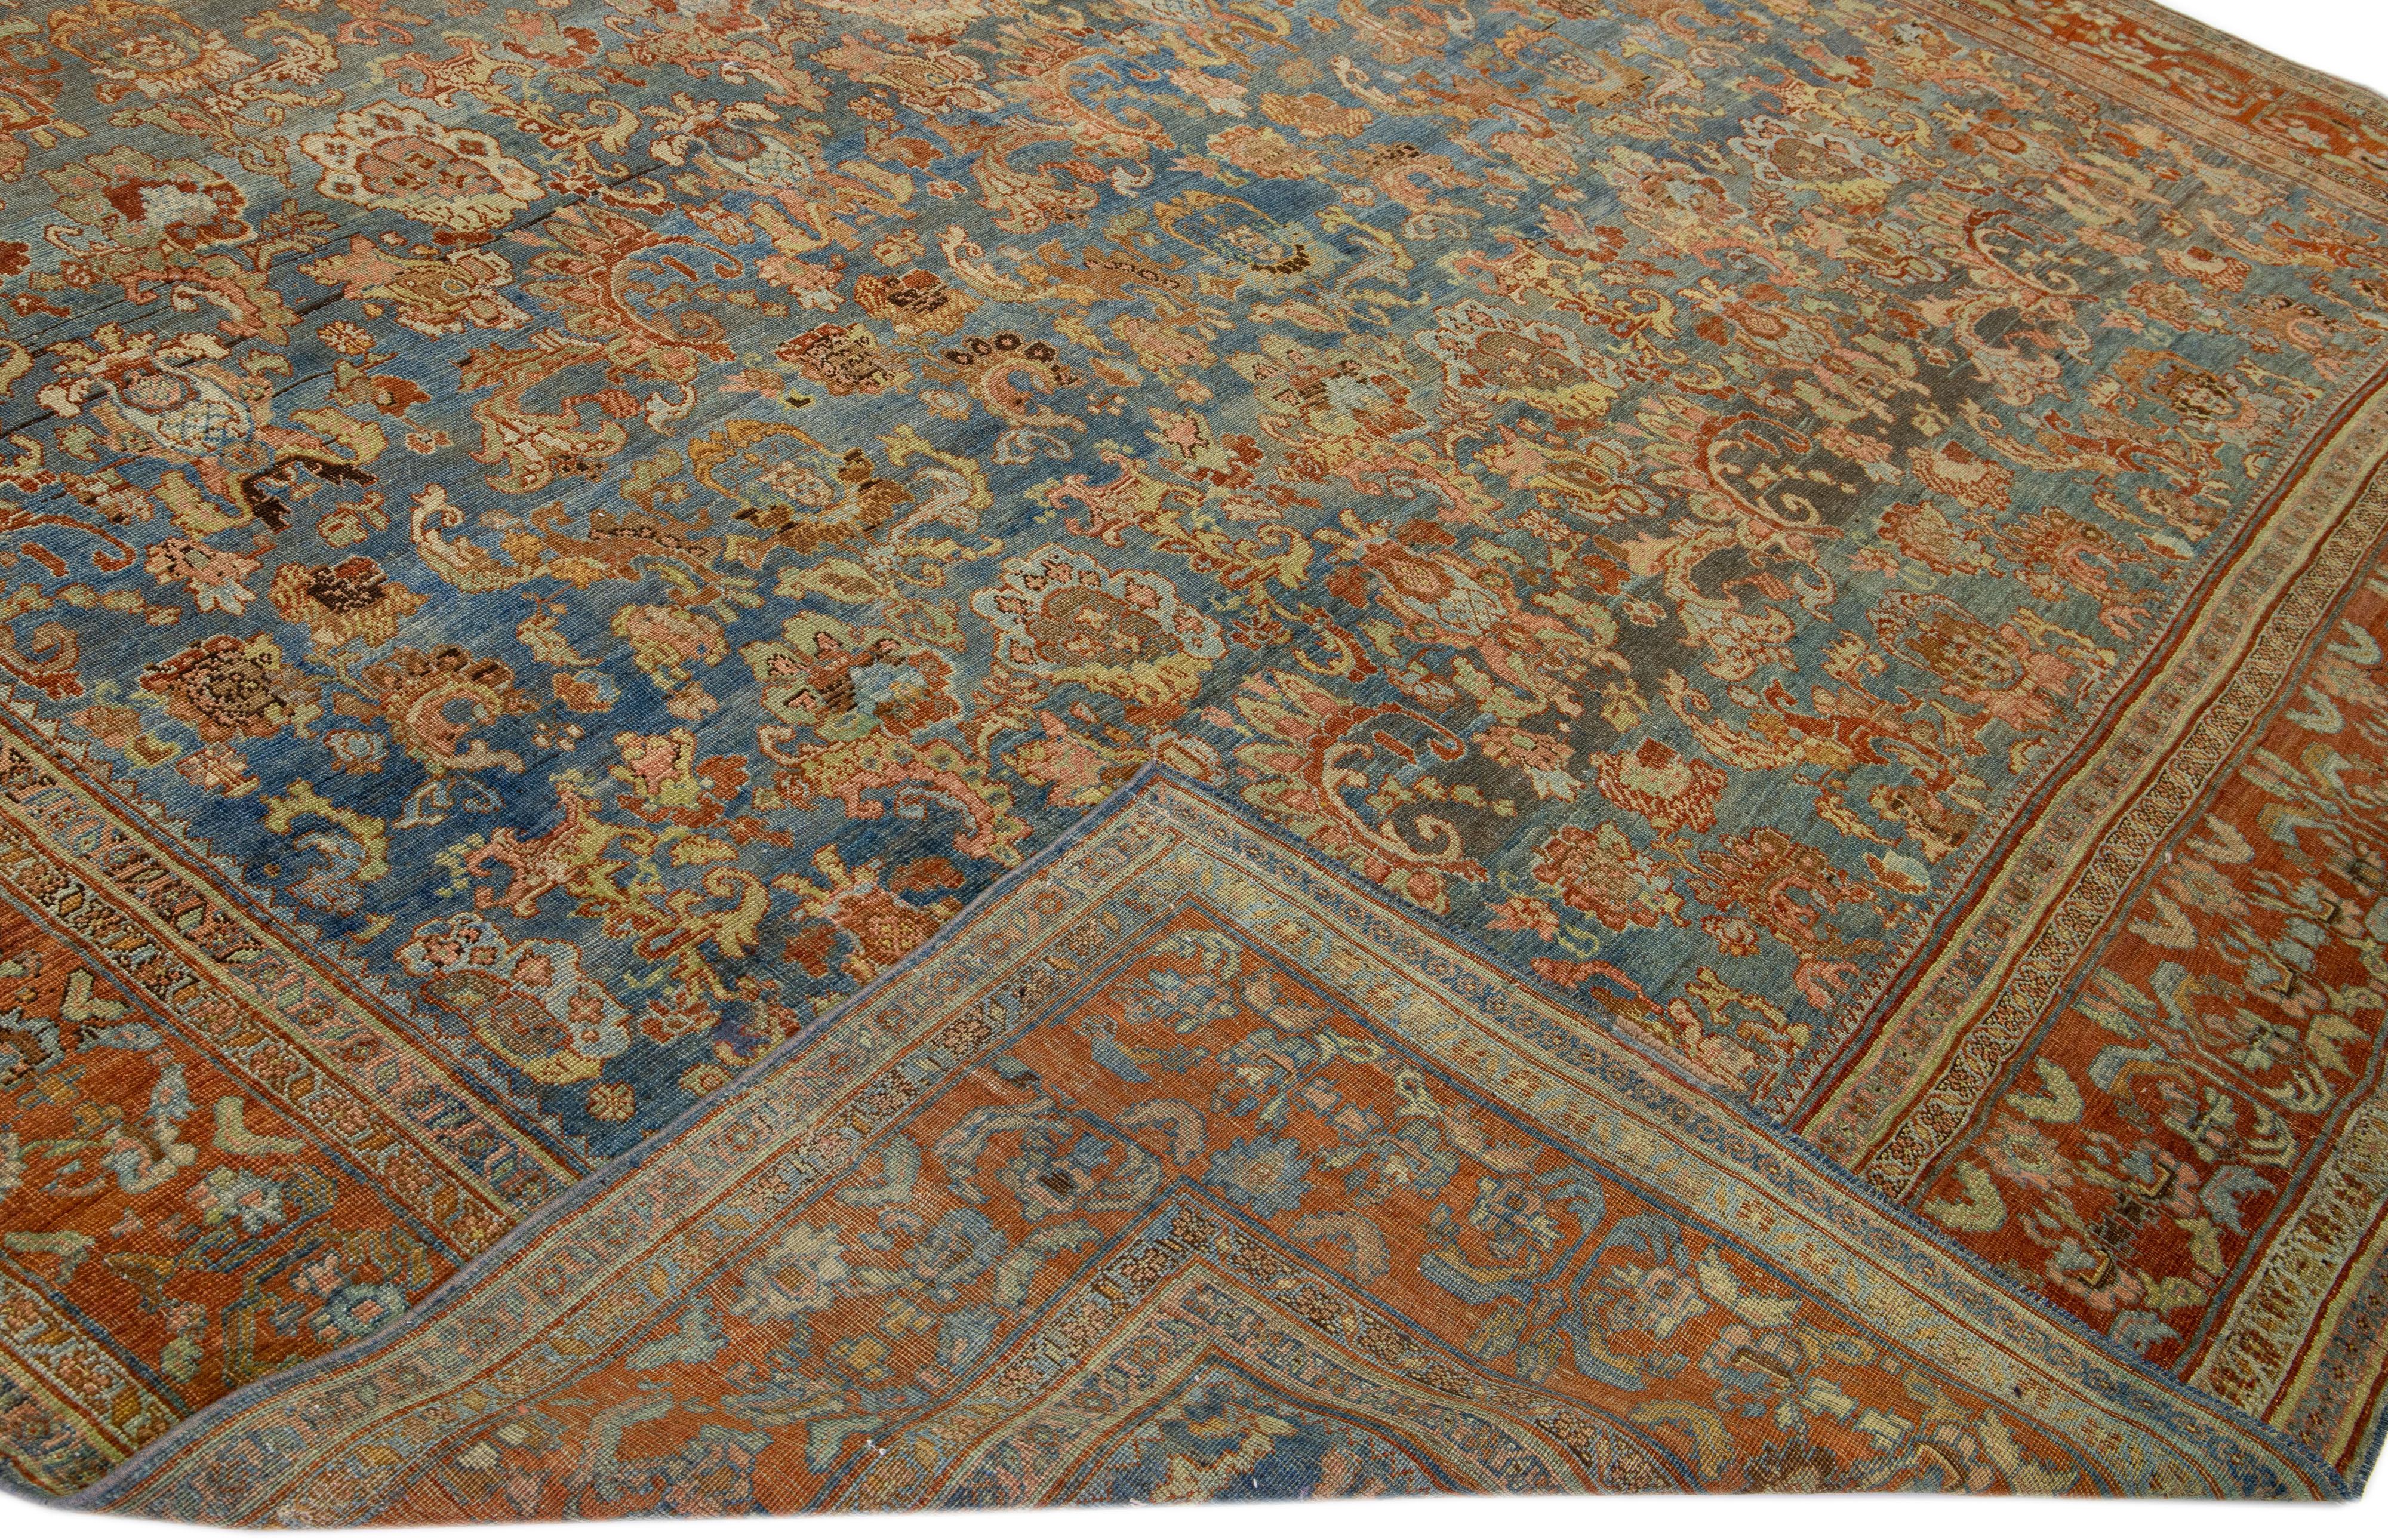 Beautiful antique Bidjar hand-knotted wool rug with a blue field. This Bidjar rug has a rusted frame and multicolor accents in a gorgeous all-over traditional floral design.

This rug measures 12'3